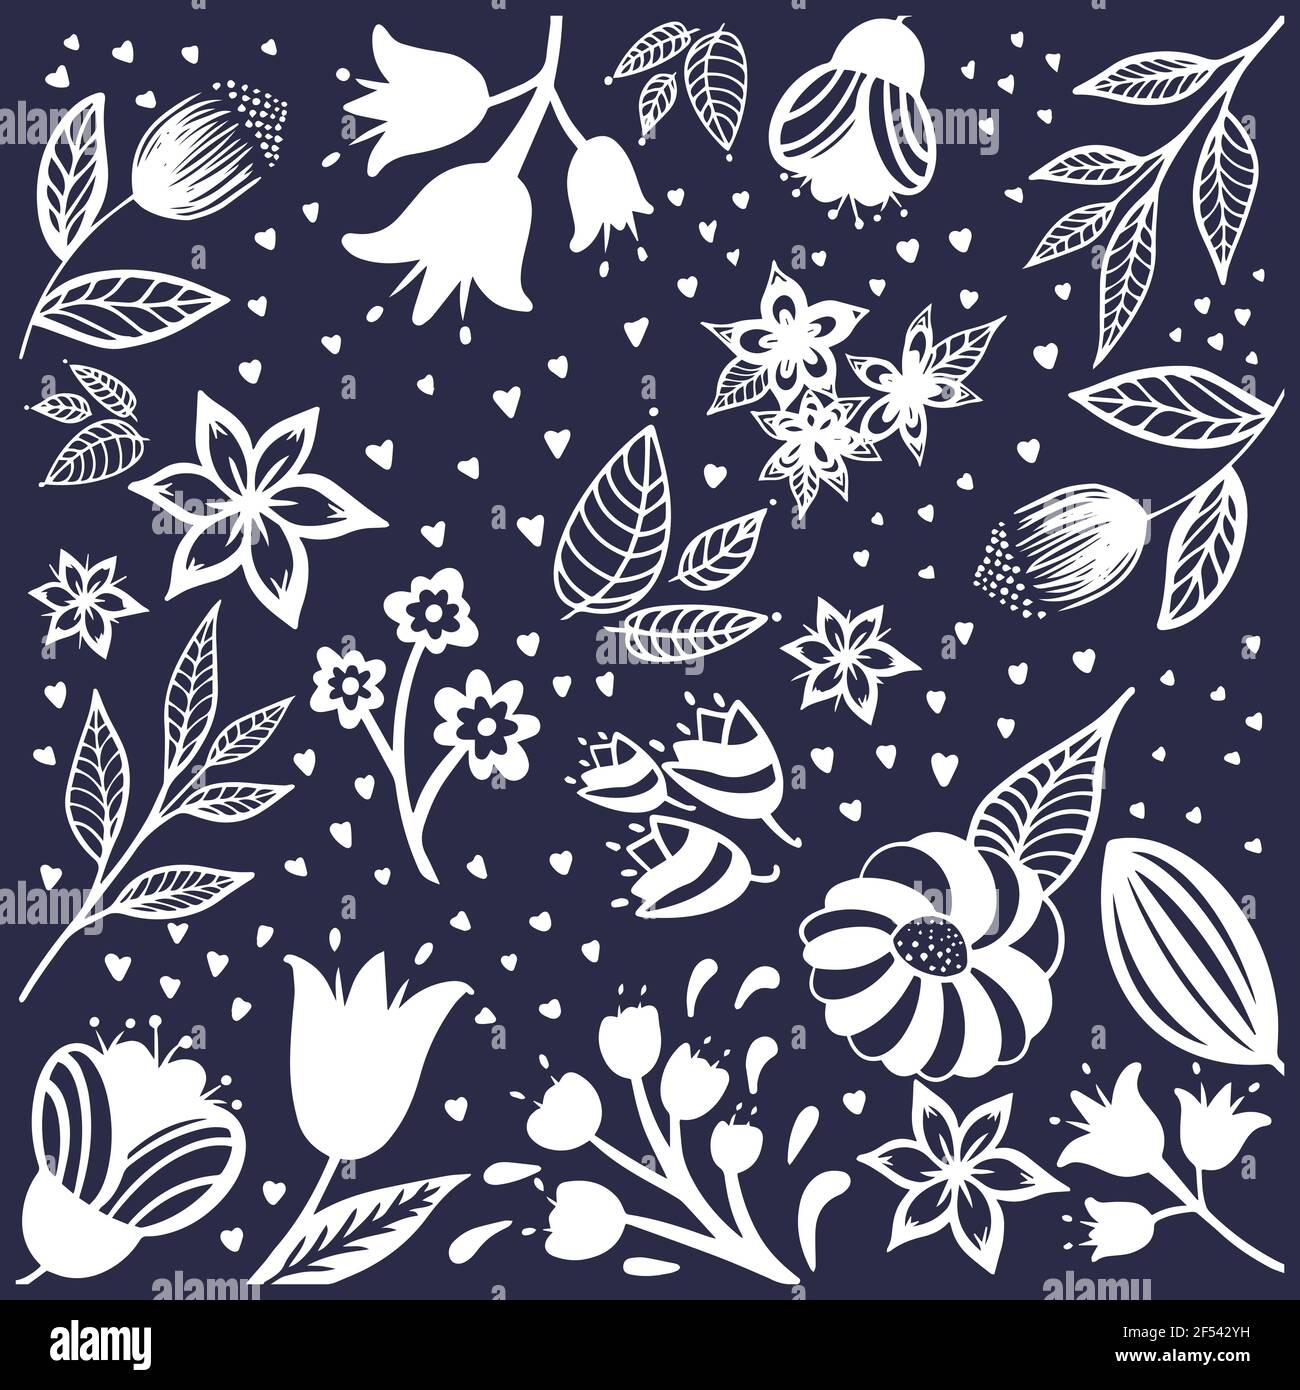 Flowers seamless pattern. White silhouettes flowers, leafs, branches on dark blue background. Vector illustration. Stock Vector